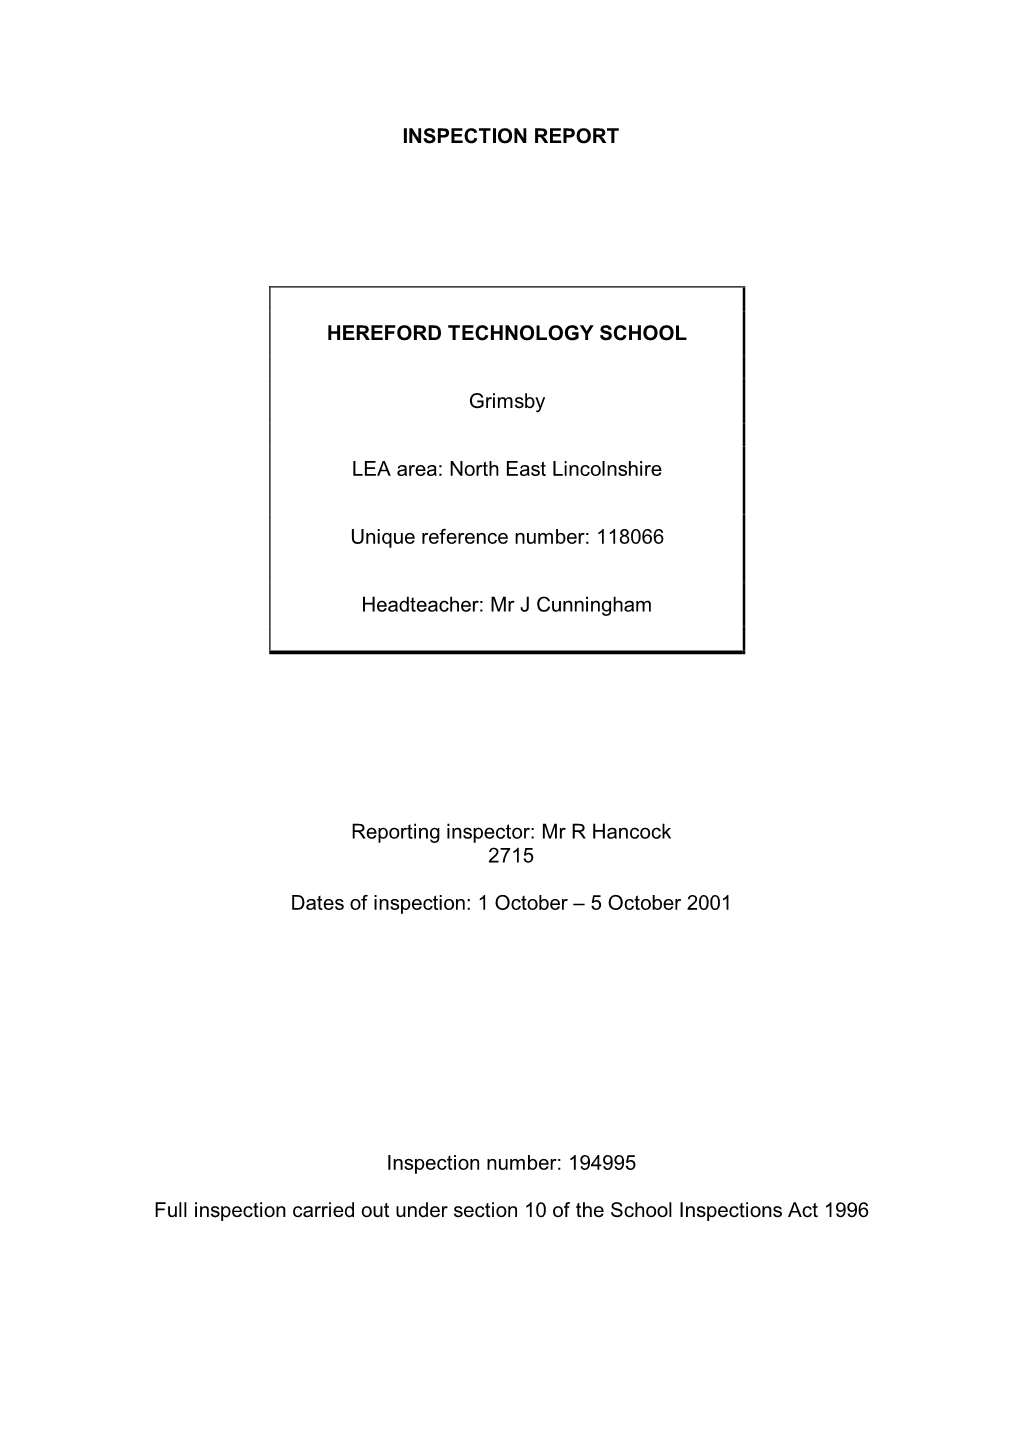 INSPECTION REPORT HEREFORD TECHNOLOGY SCHOOL Grimsby